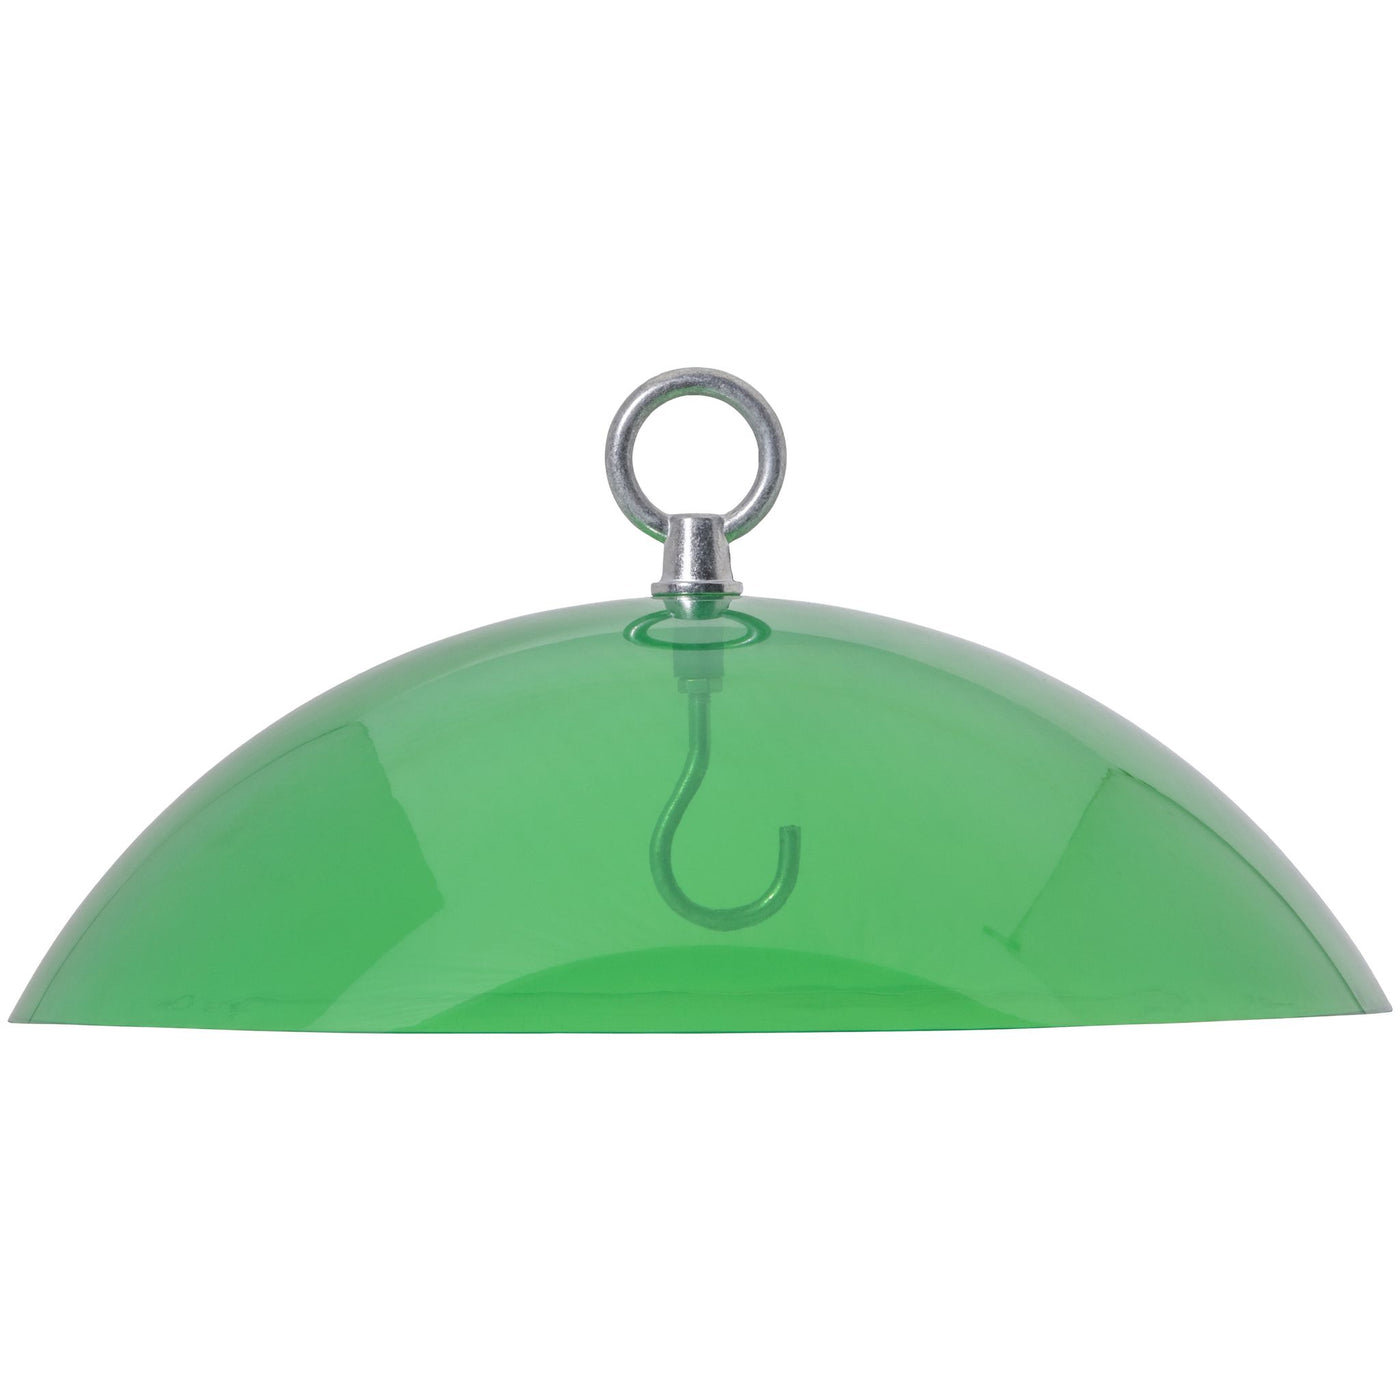 Protective Cover for Hanging Bird Feeder in Green - Birds Choice